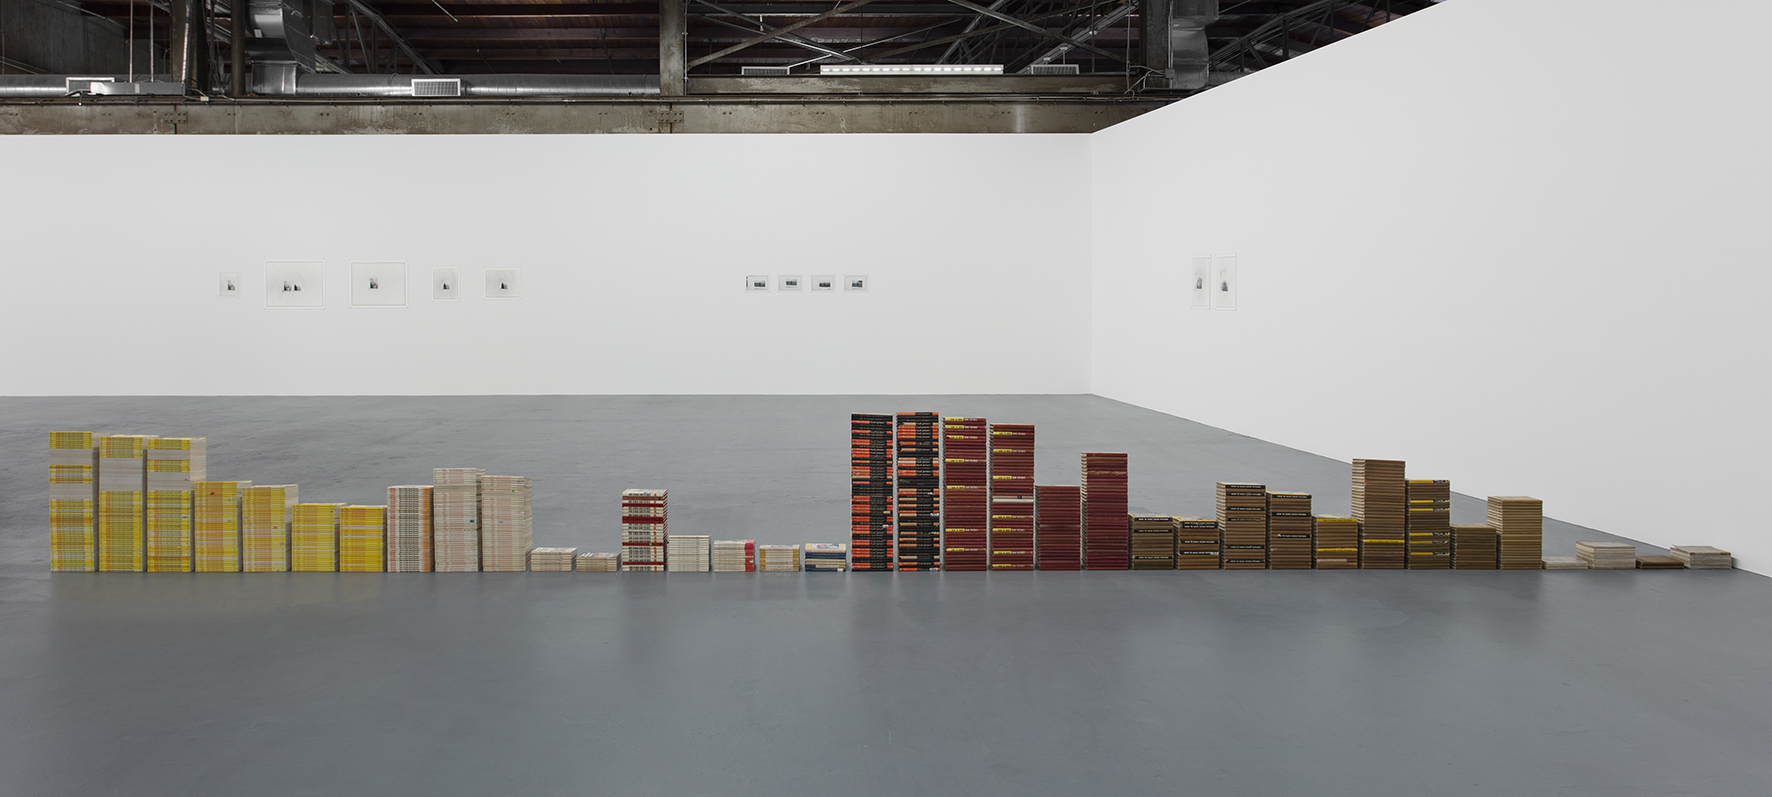 Photo: Brian Forrest
Courtesy: The Museum of Contemporary Art, Los Angeles